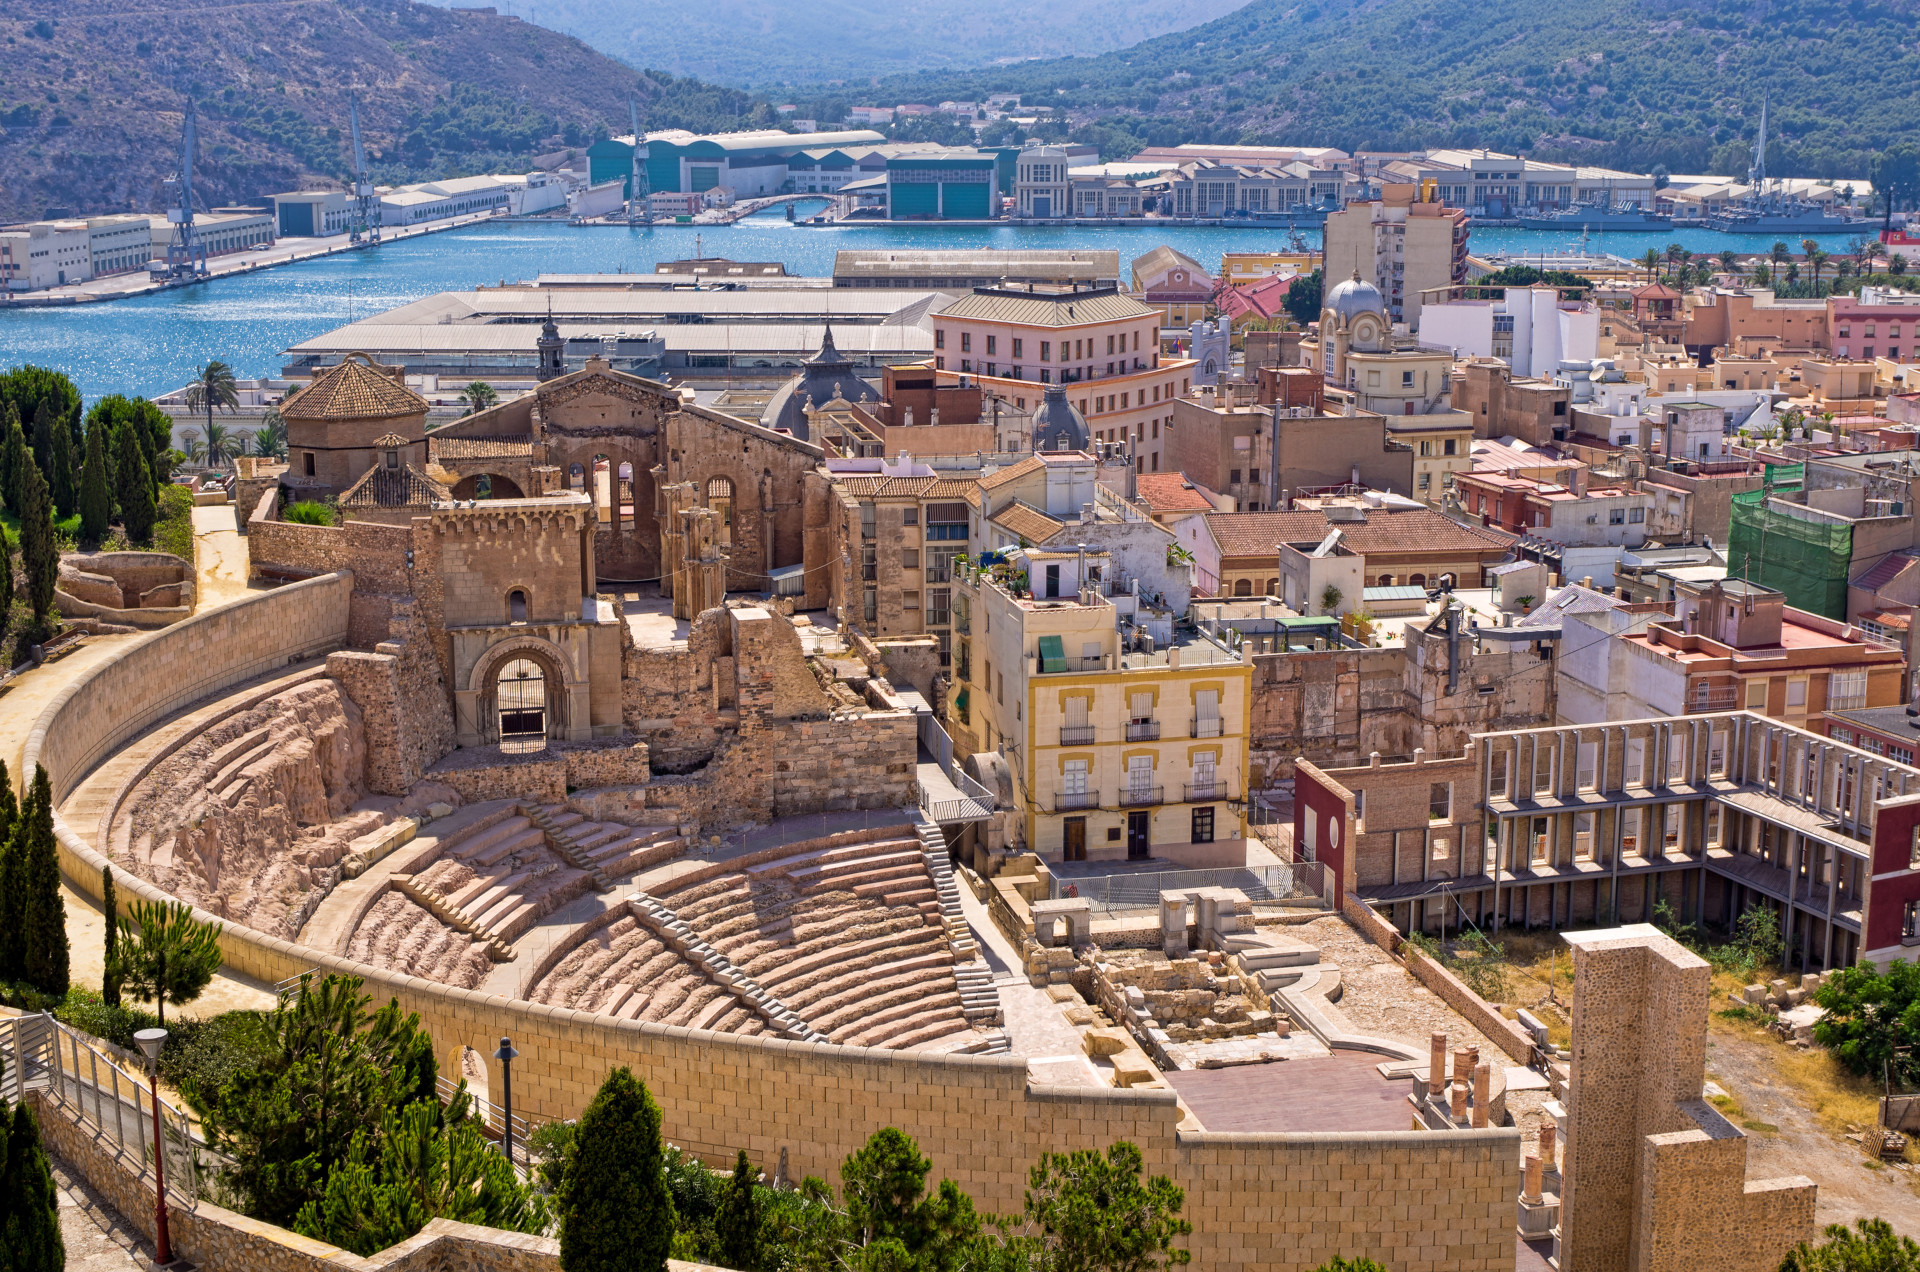 The Spanish Cartagena is located in the province of Murcia and the Roman amphitheater is one of its main tourist attractions.